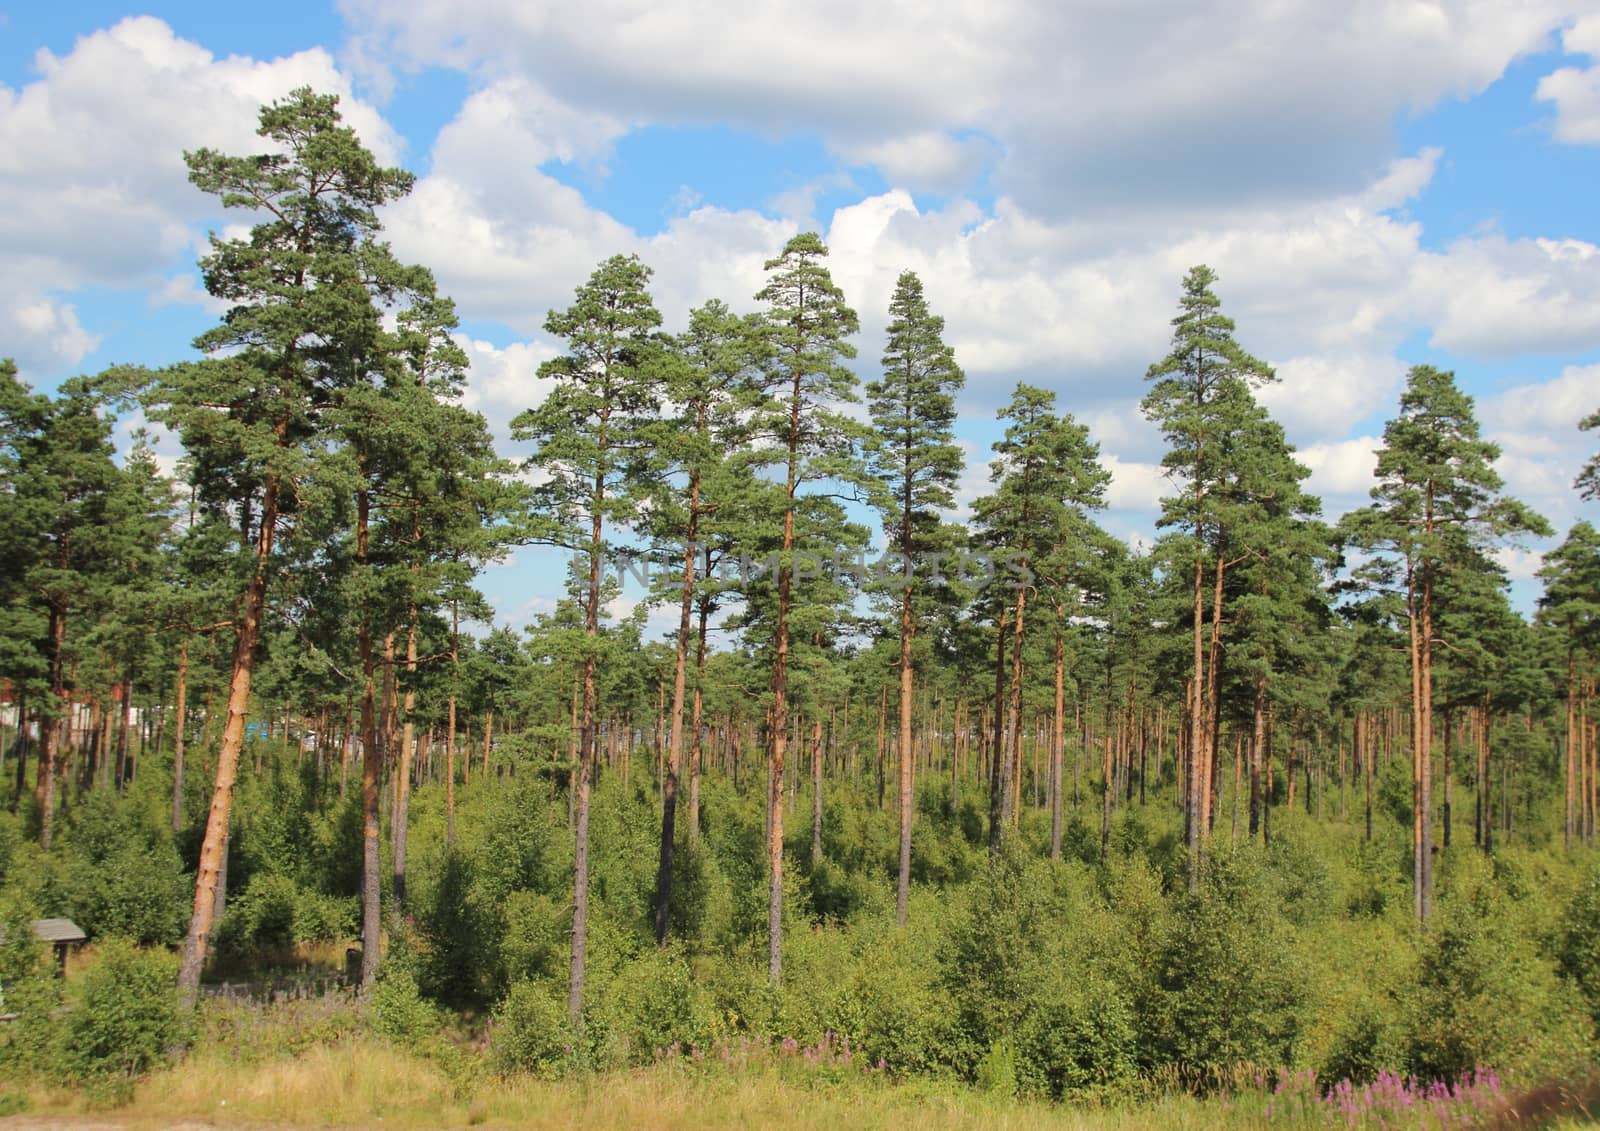 Landscape of pine wood forest with blue sky